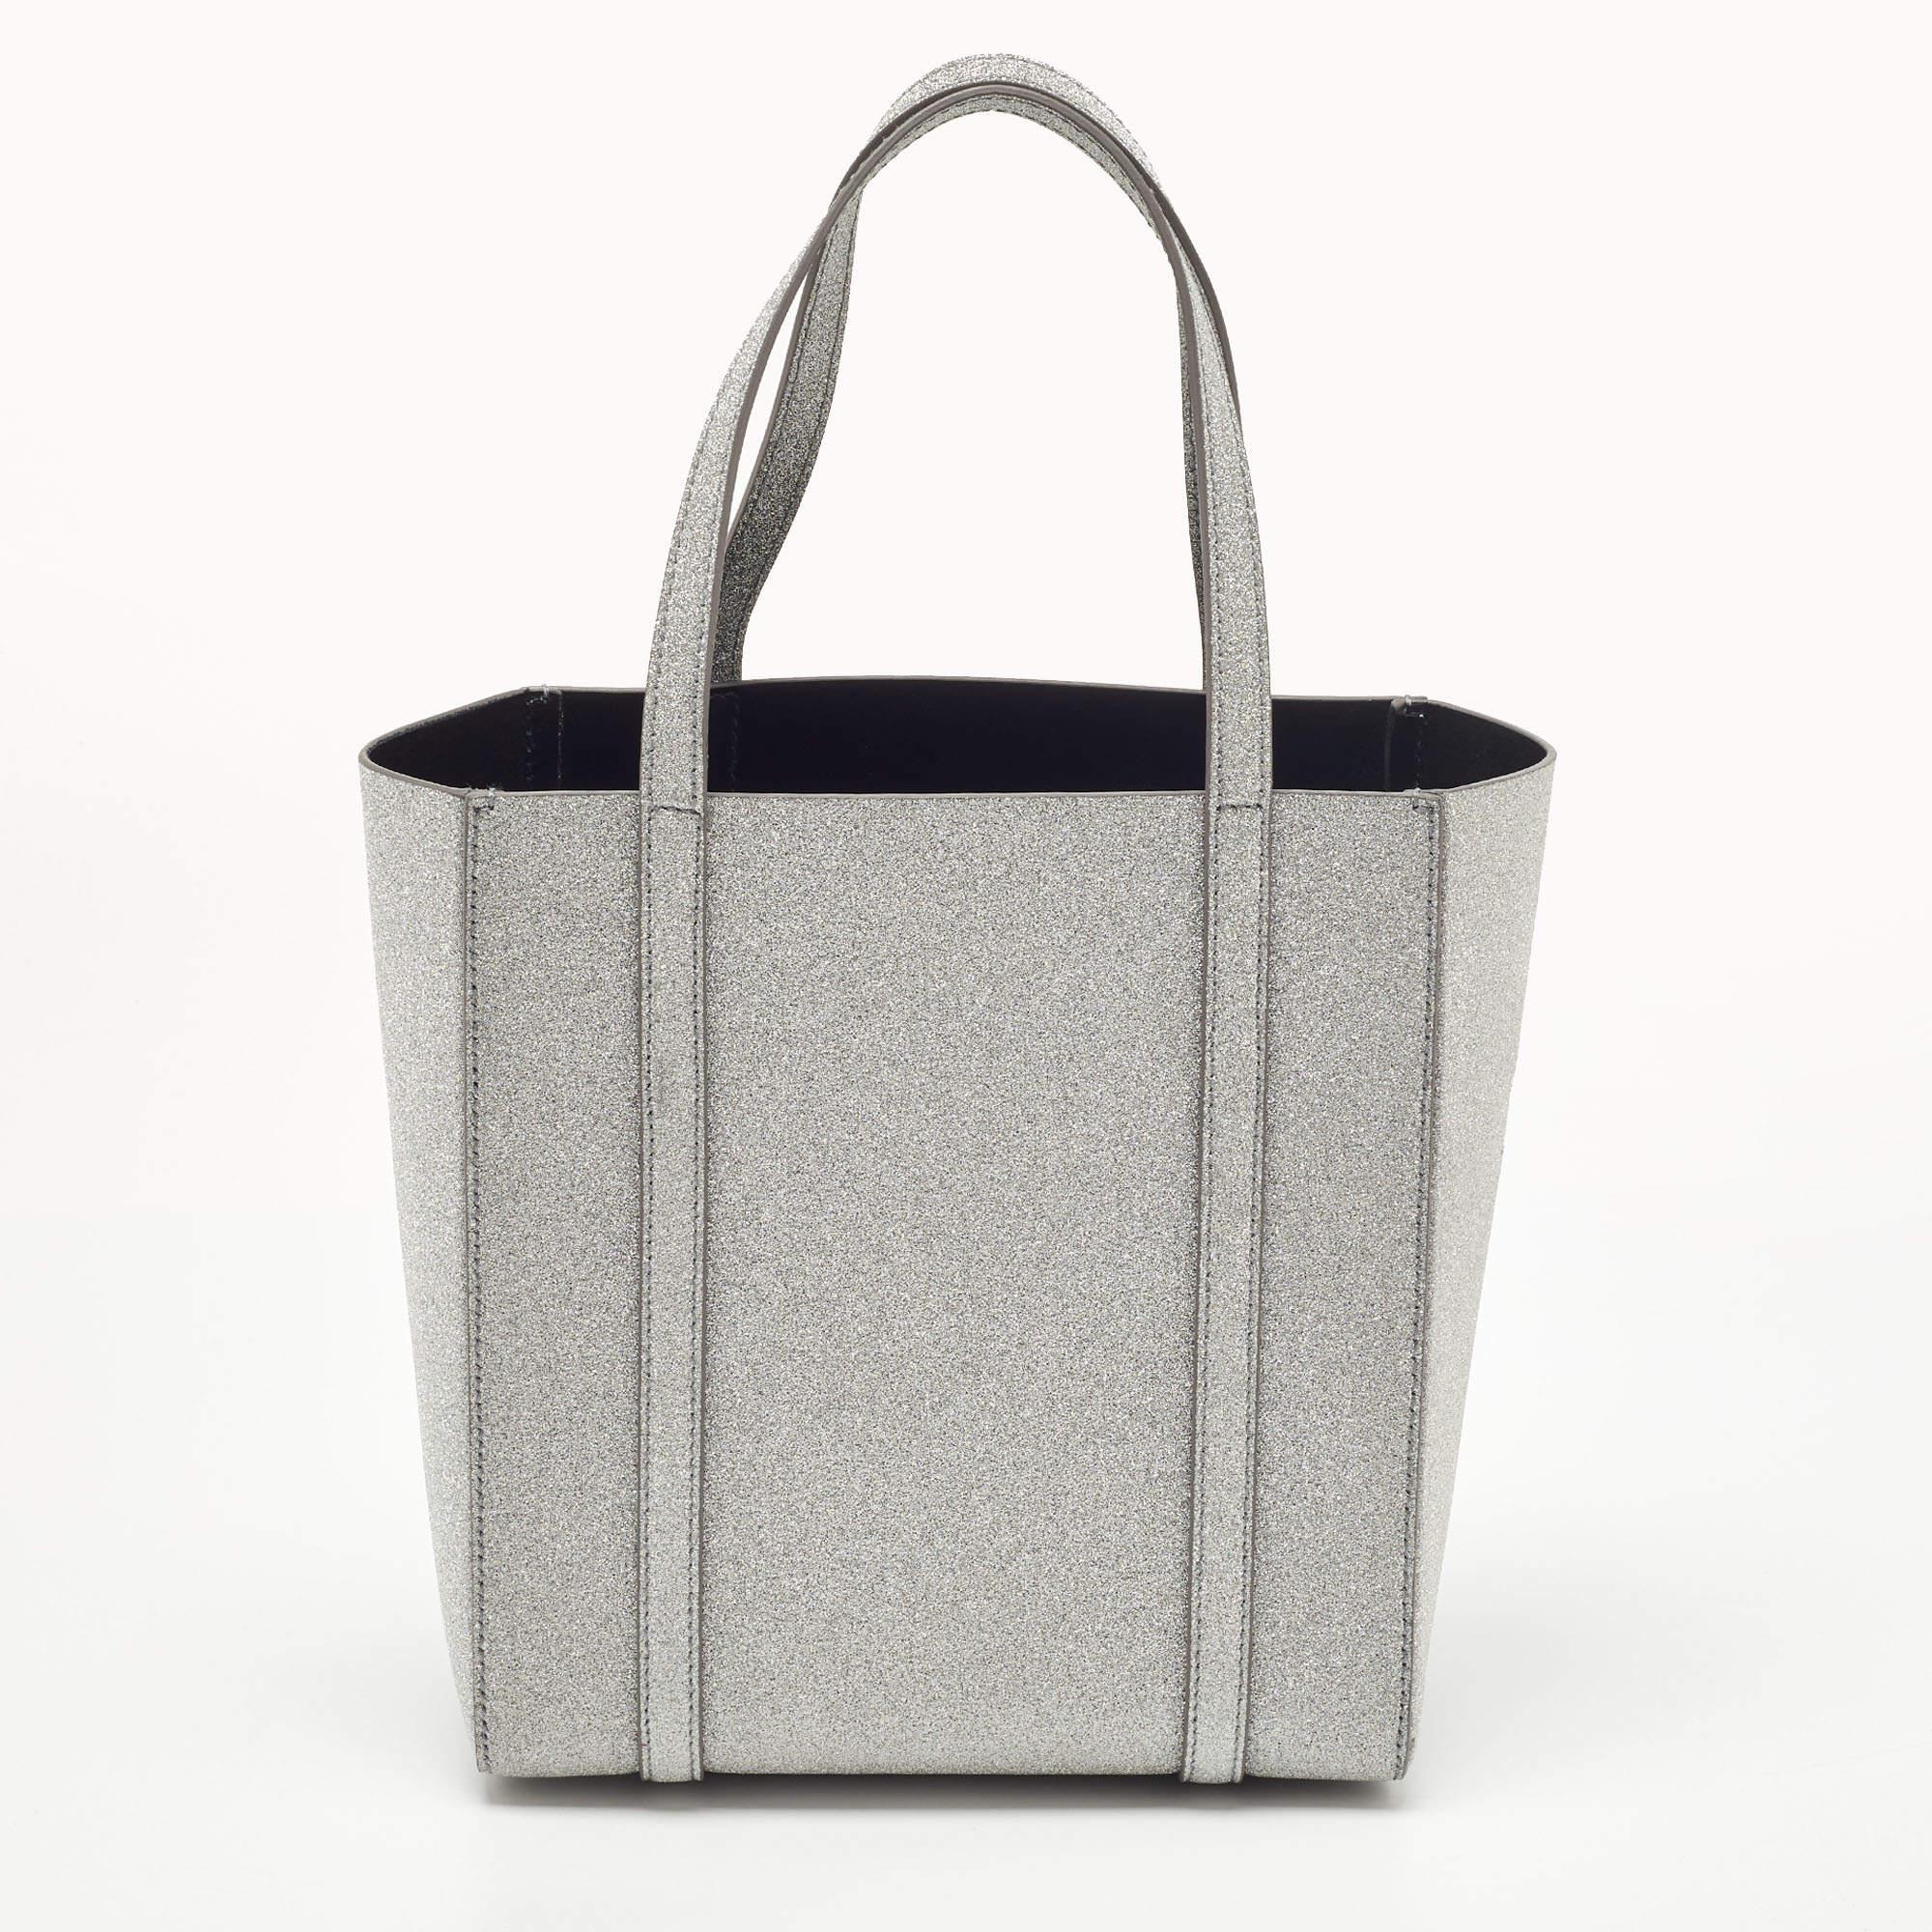 Be it your daily commute to work, shopping sprees, and vacations, a tote bag will never fail you. This designer creation is made to last and assist you in your fashion-filled days.

Includes: Info Booklet, Detachable Strap

